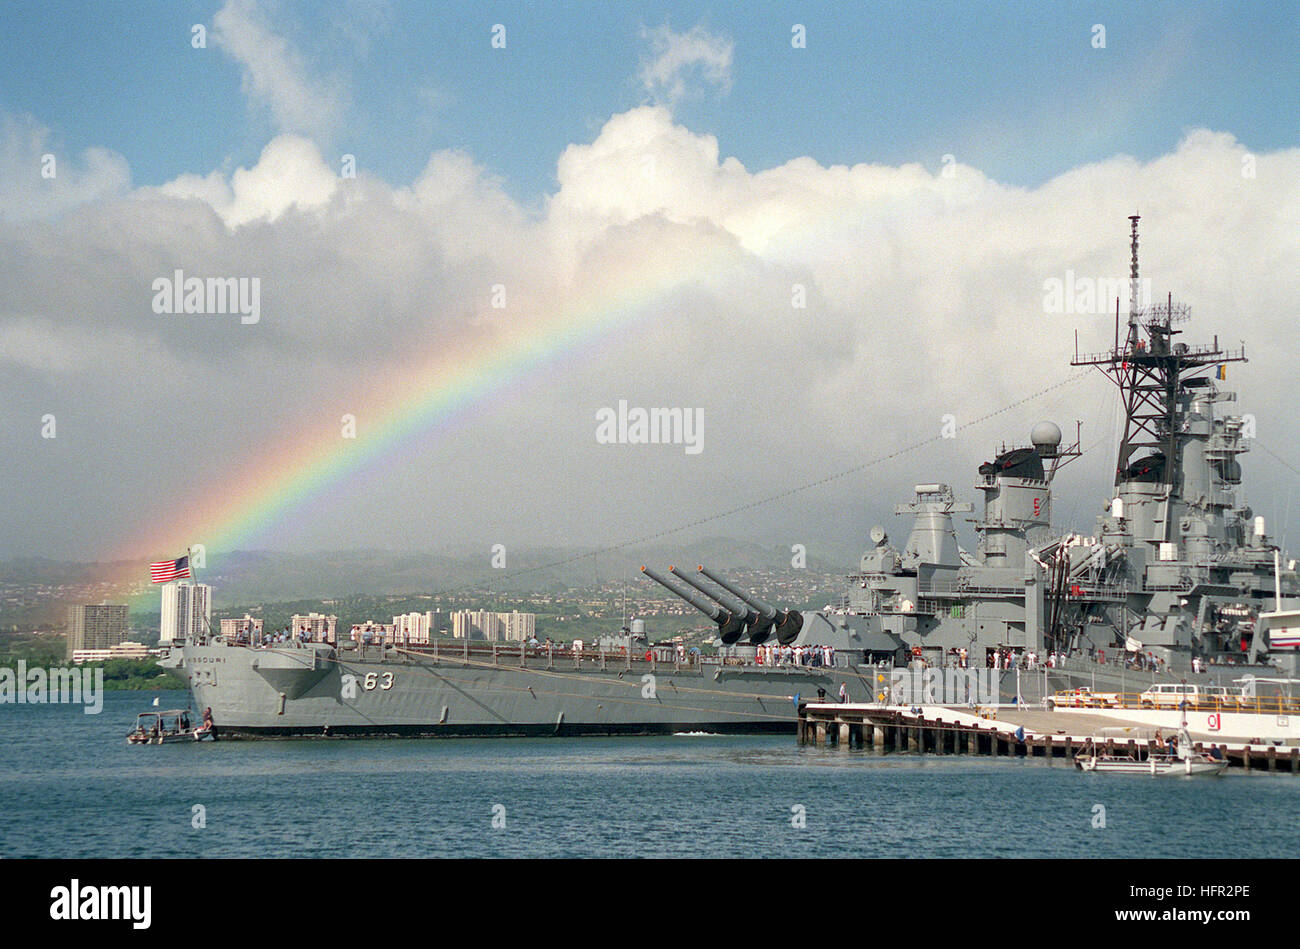 A rainbow highlights the sky in the background as the battleship USS MISSOURI (BB-63) lies tied up at the naval station.  The MISSOURI is in Hawaii to take part in the observance of the 50th anniversary of the Japanese attack on Pearl Harbor. USS Missouri (BB-63) rainbow Stock Photo